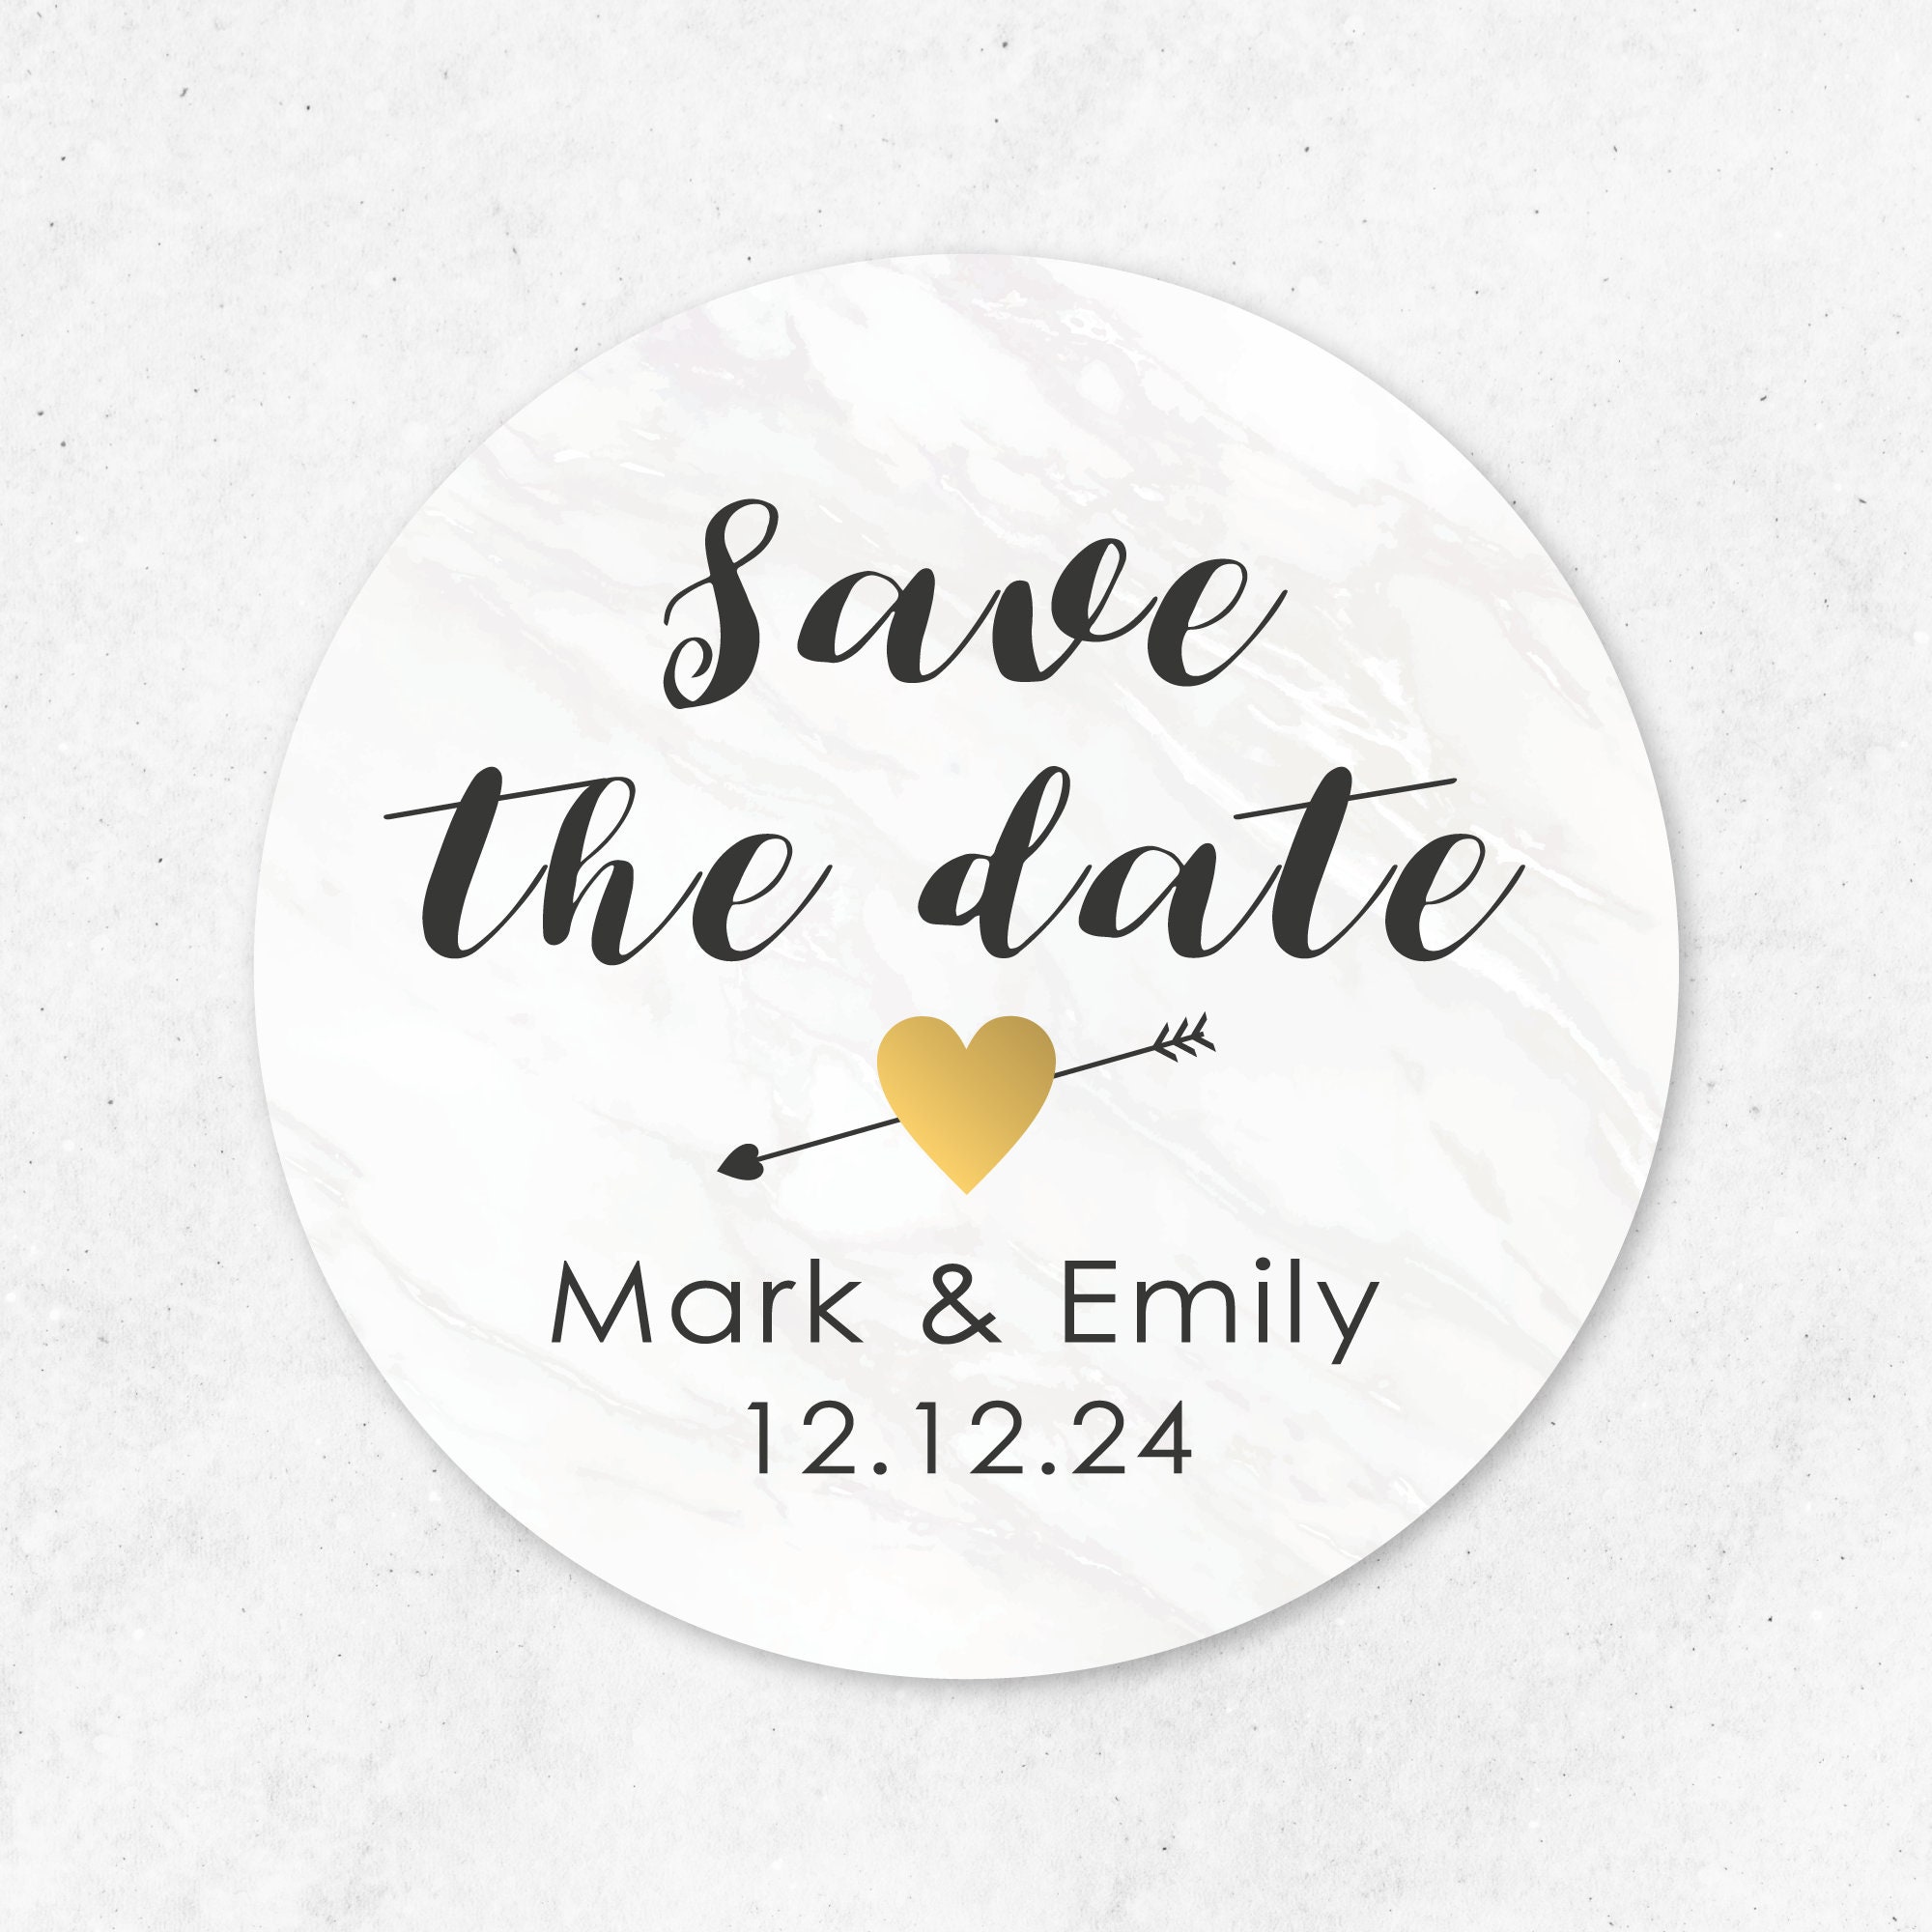 Change the Date Stickers Save the New Date Labels Save Our New